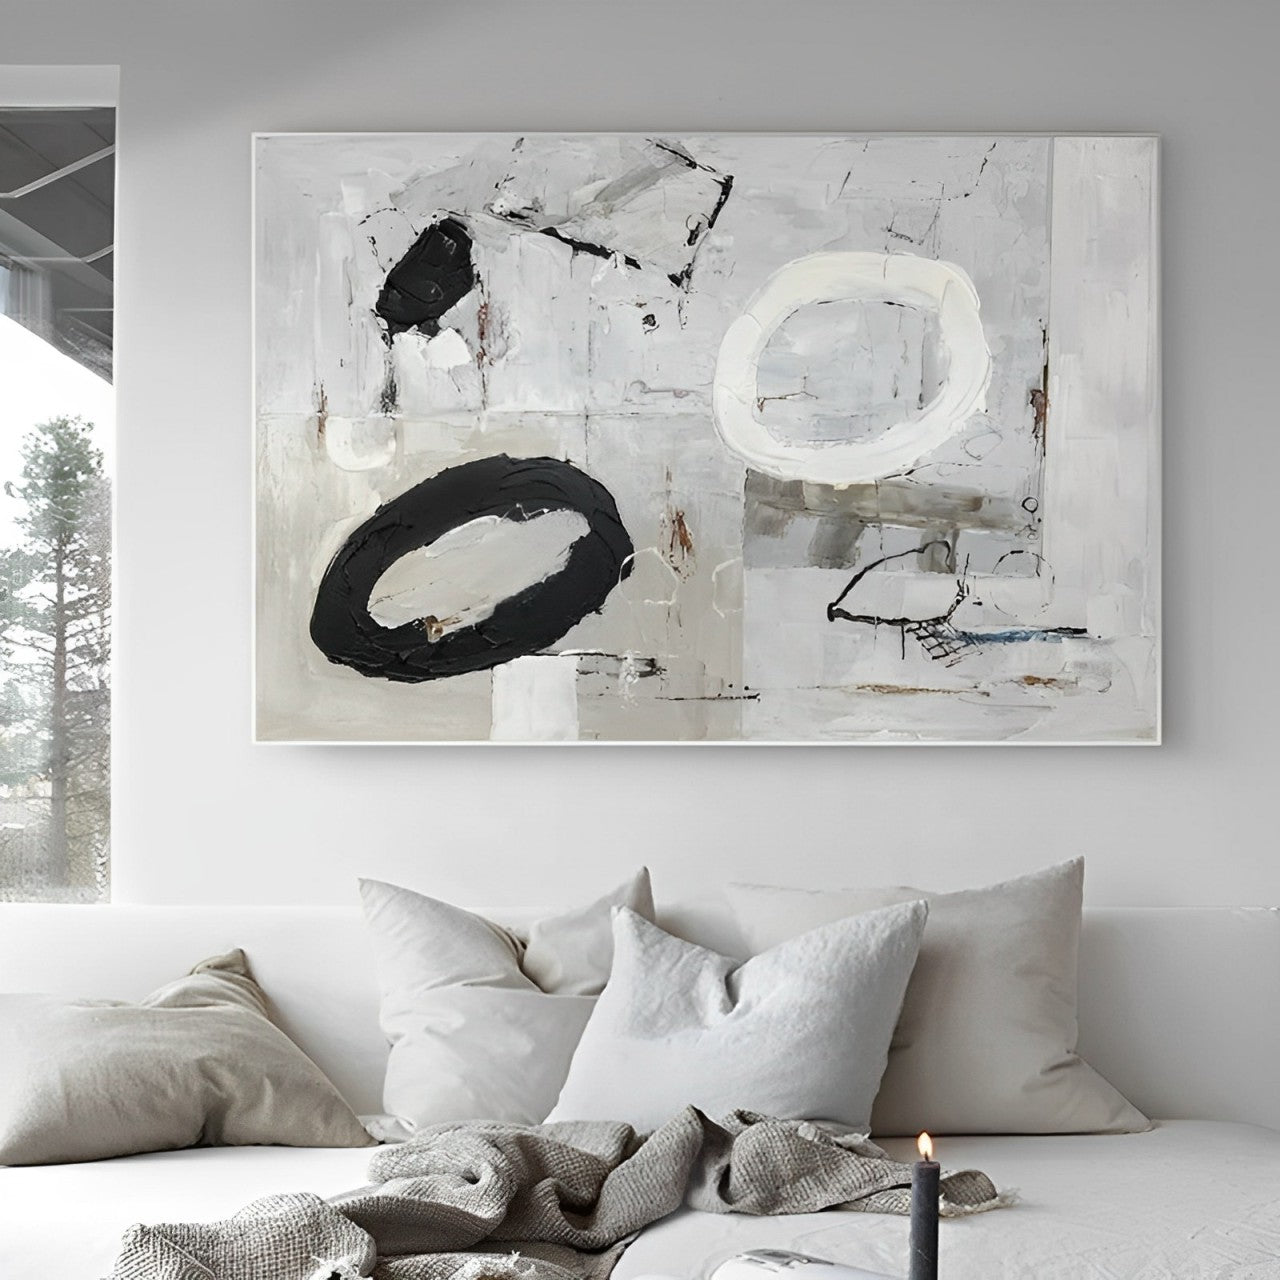 Contempo - Black and Grey Abstract Geometric Painting Wall Decor